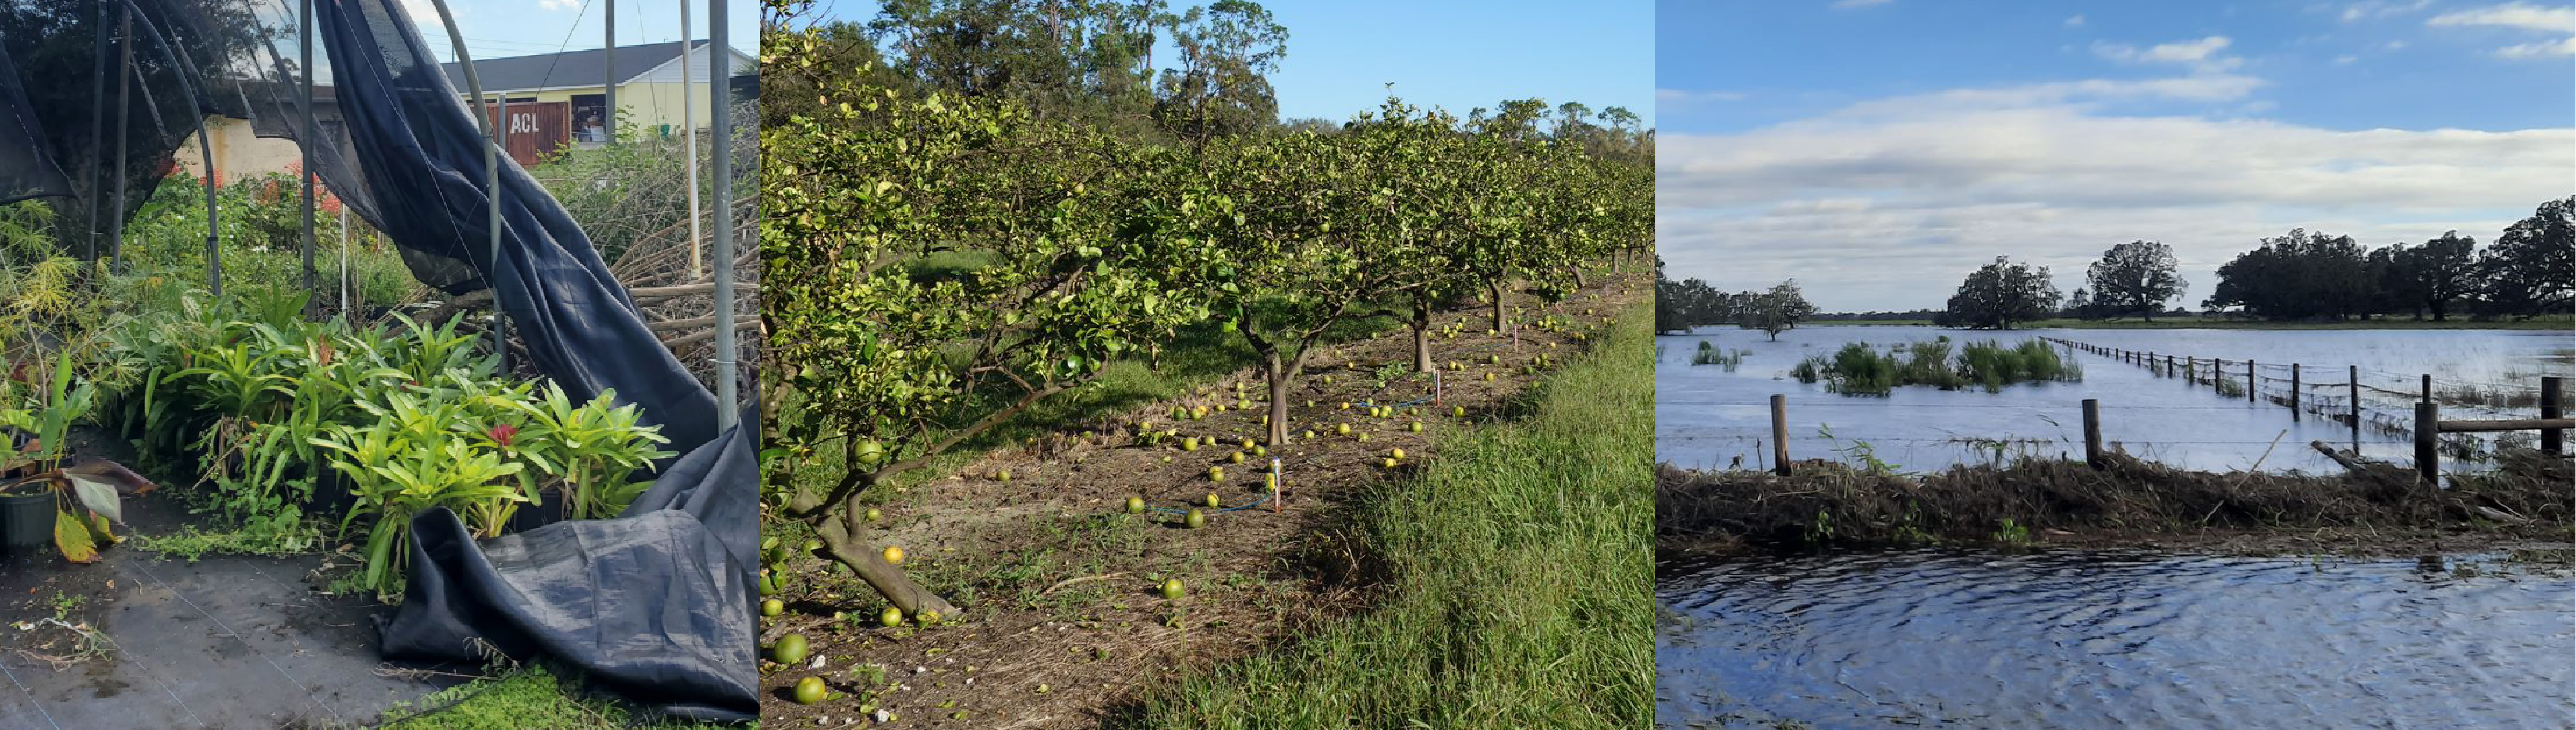 Images of agricultural damage from hurricane ian. From left to right, ferns sitting under a damaged shade screen, citrus fruit drop, and a flooded pasture.